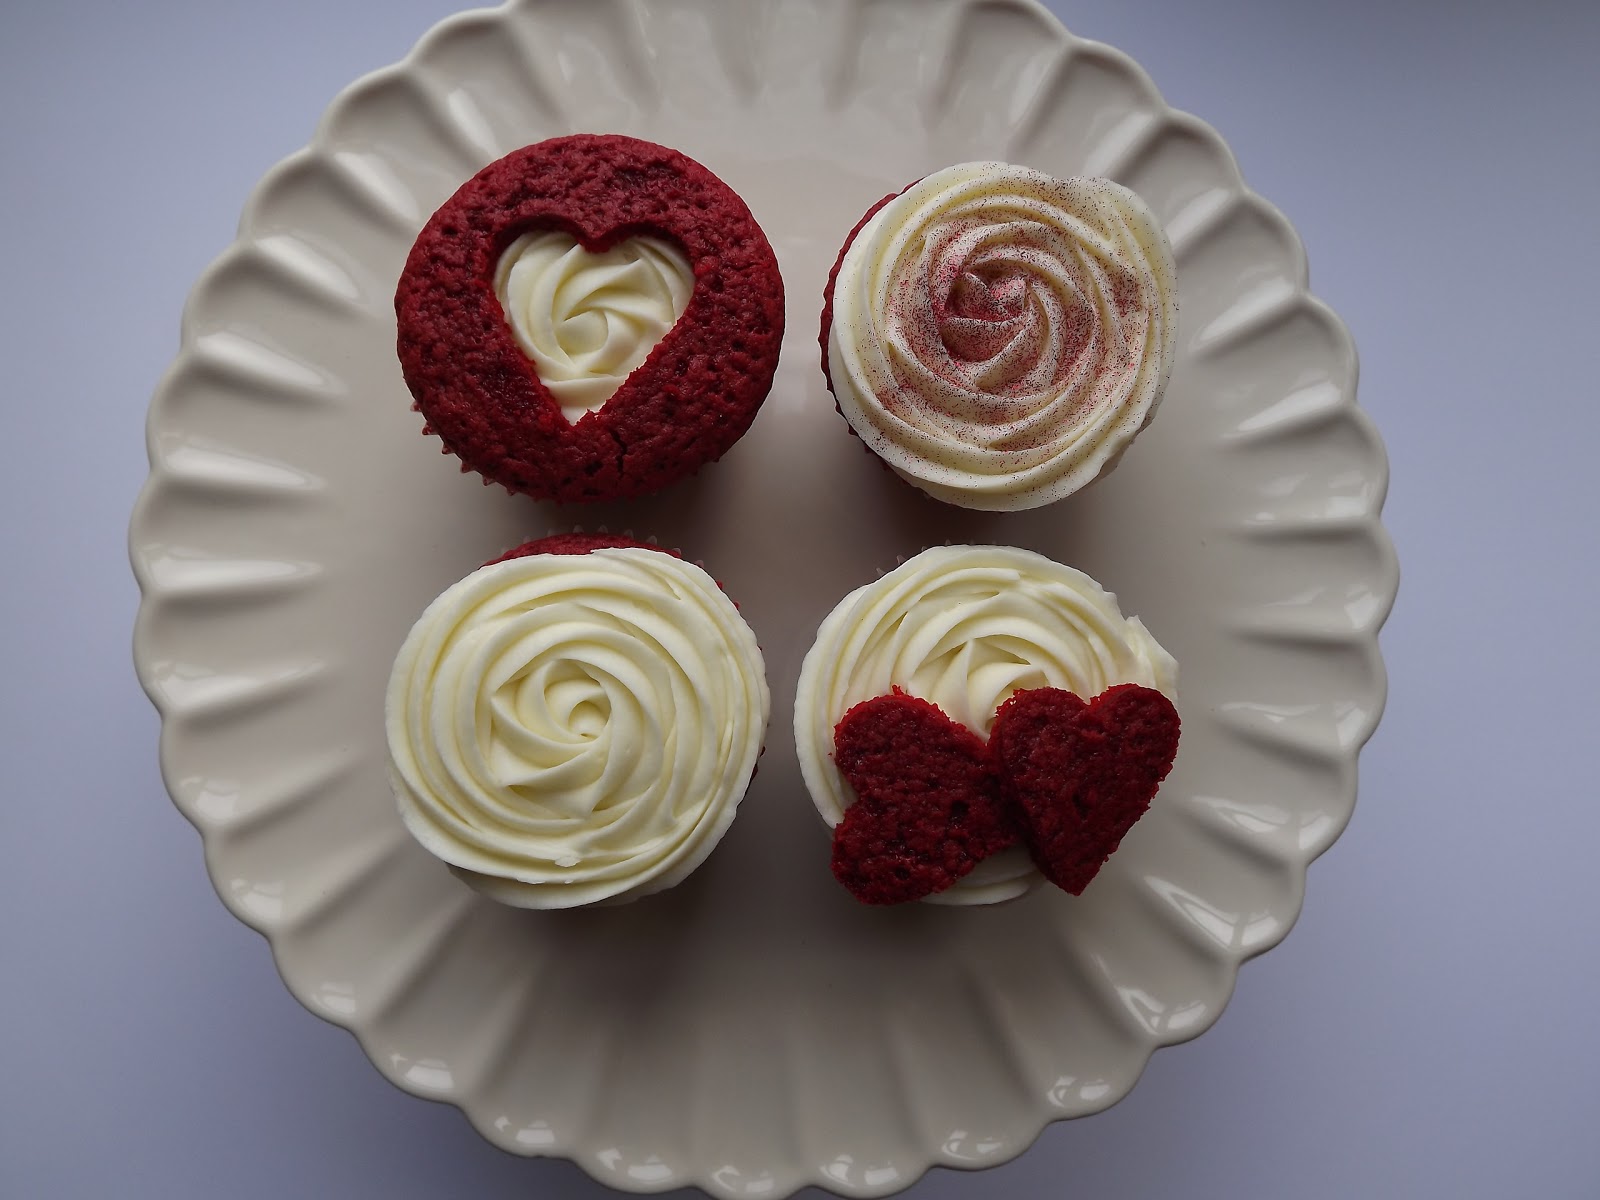 10 Photos of Red Velvet Cupcakes Decorated For Valentine's